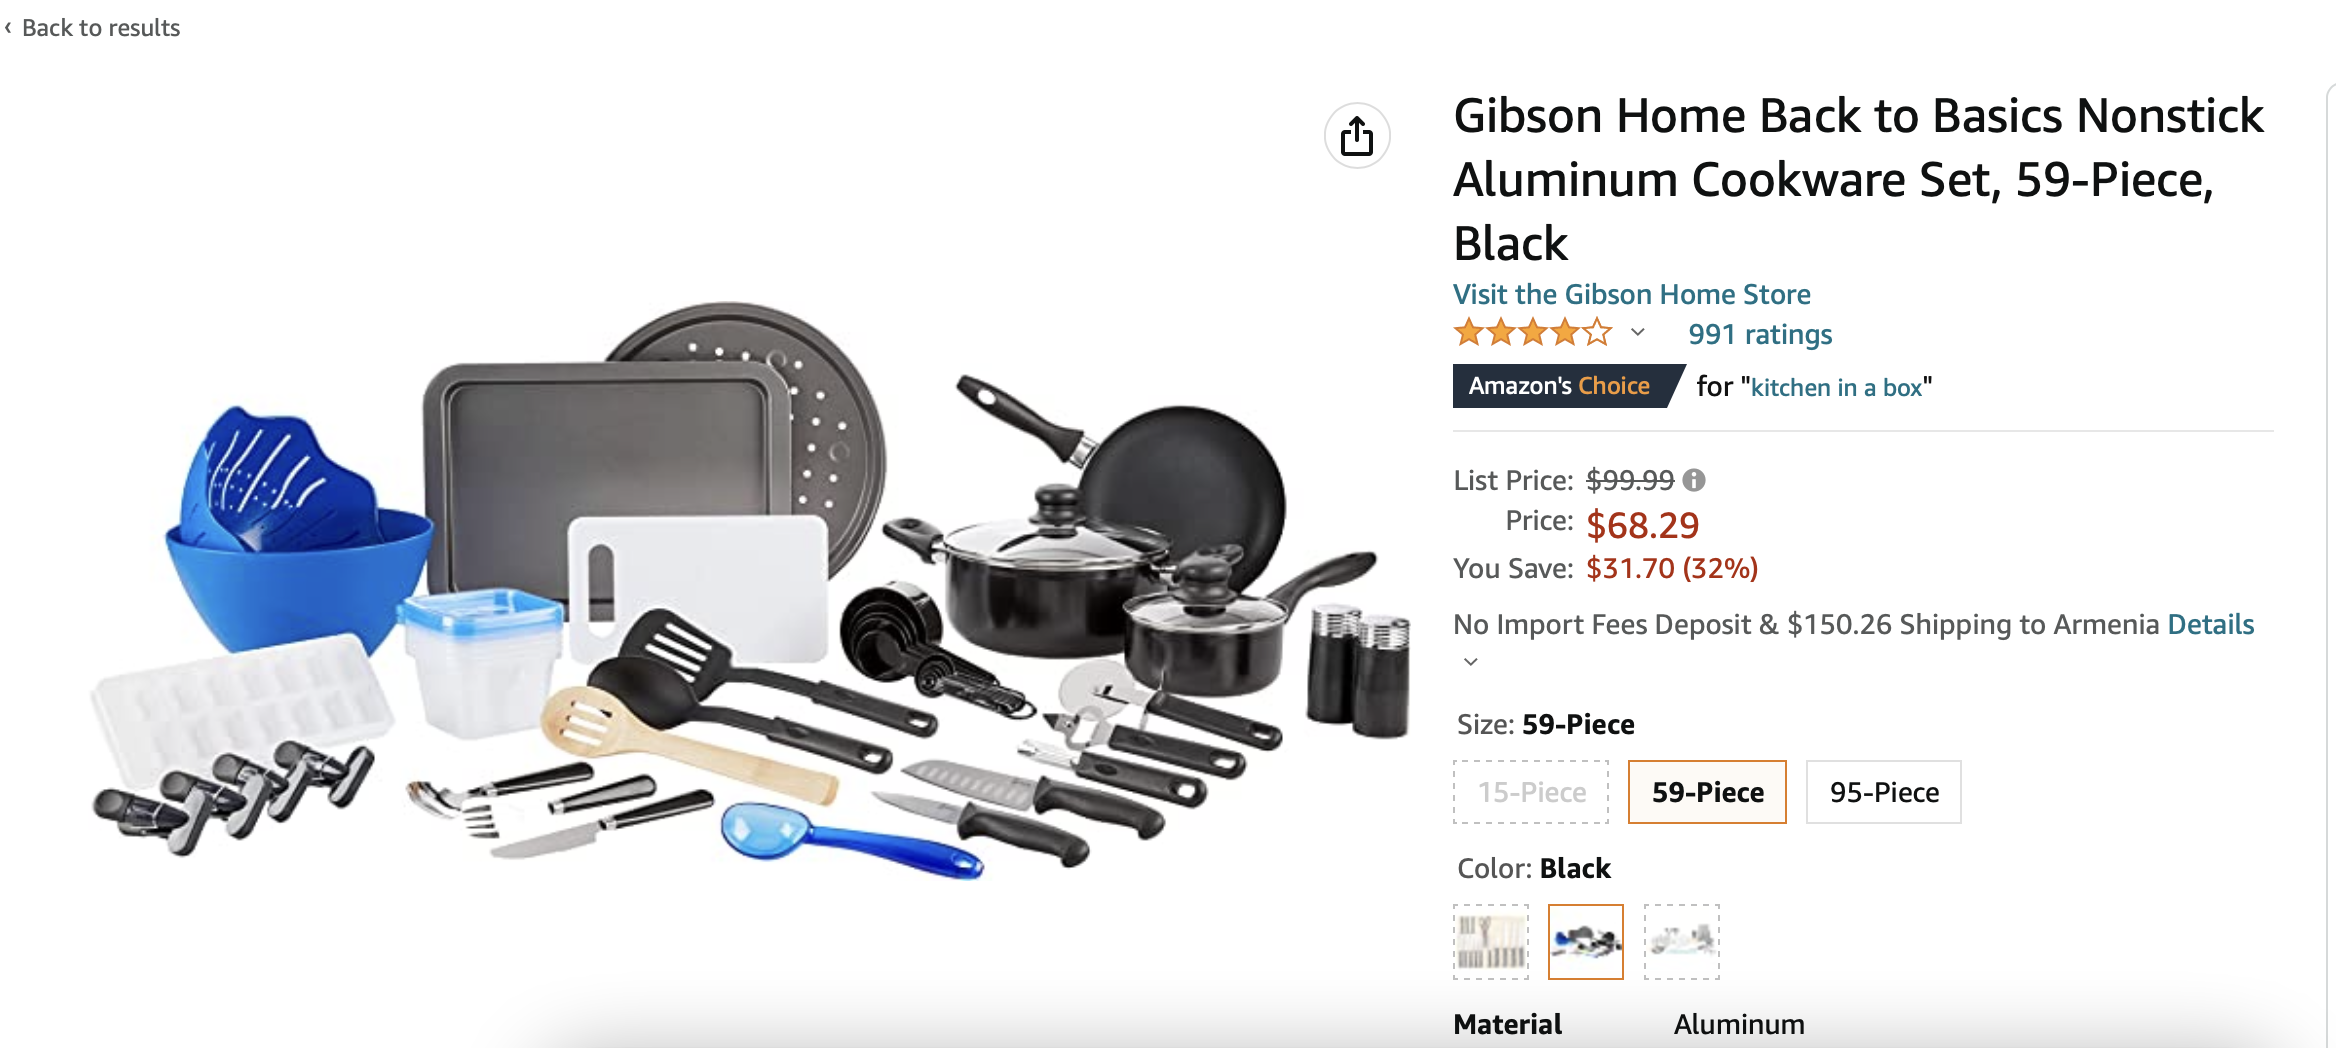 Amazon startup ideas: Home cooking